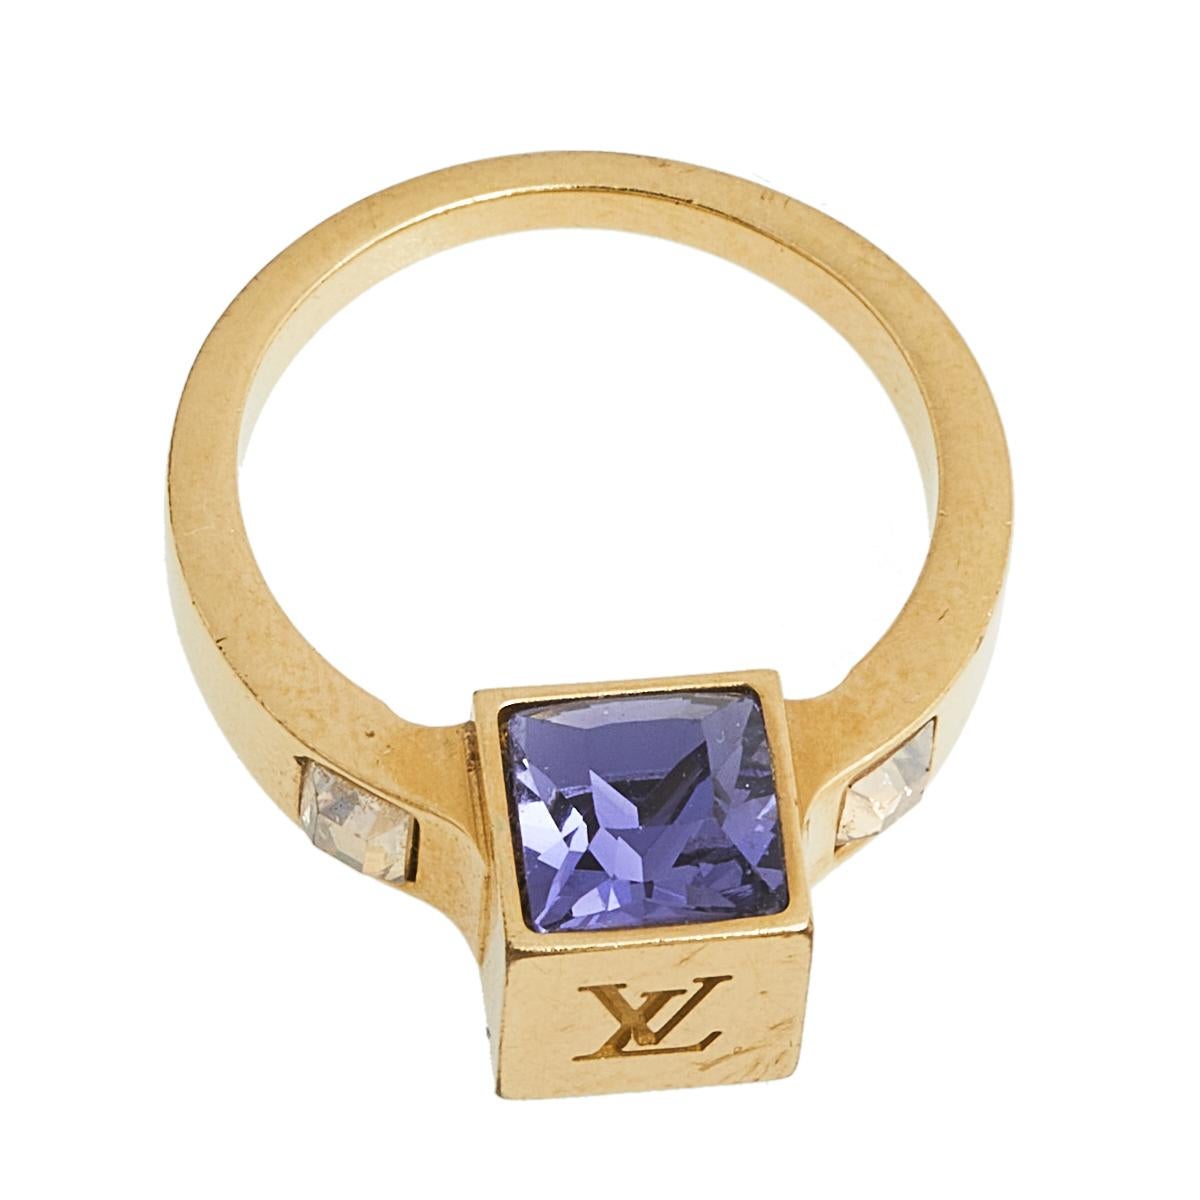 Authenticated Used LOUIS VUITTON Louis Vuitton Signet Ring